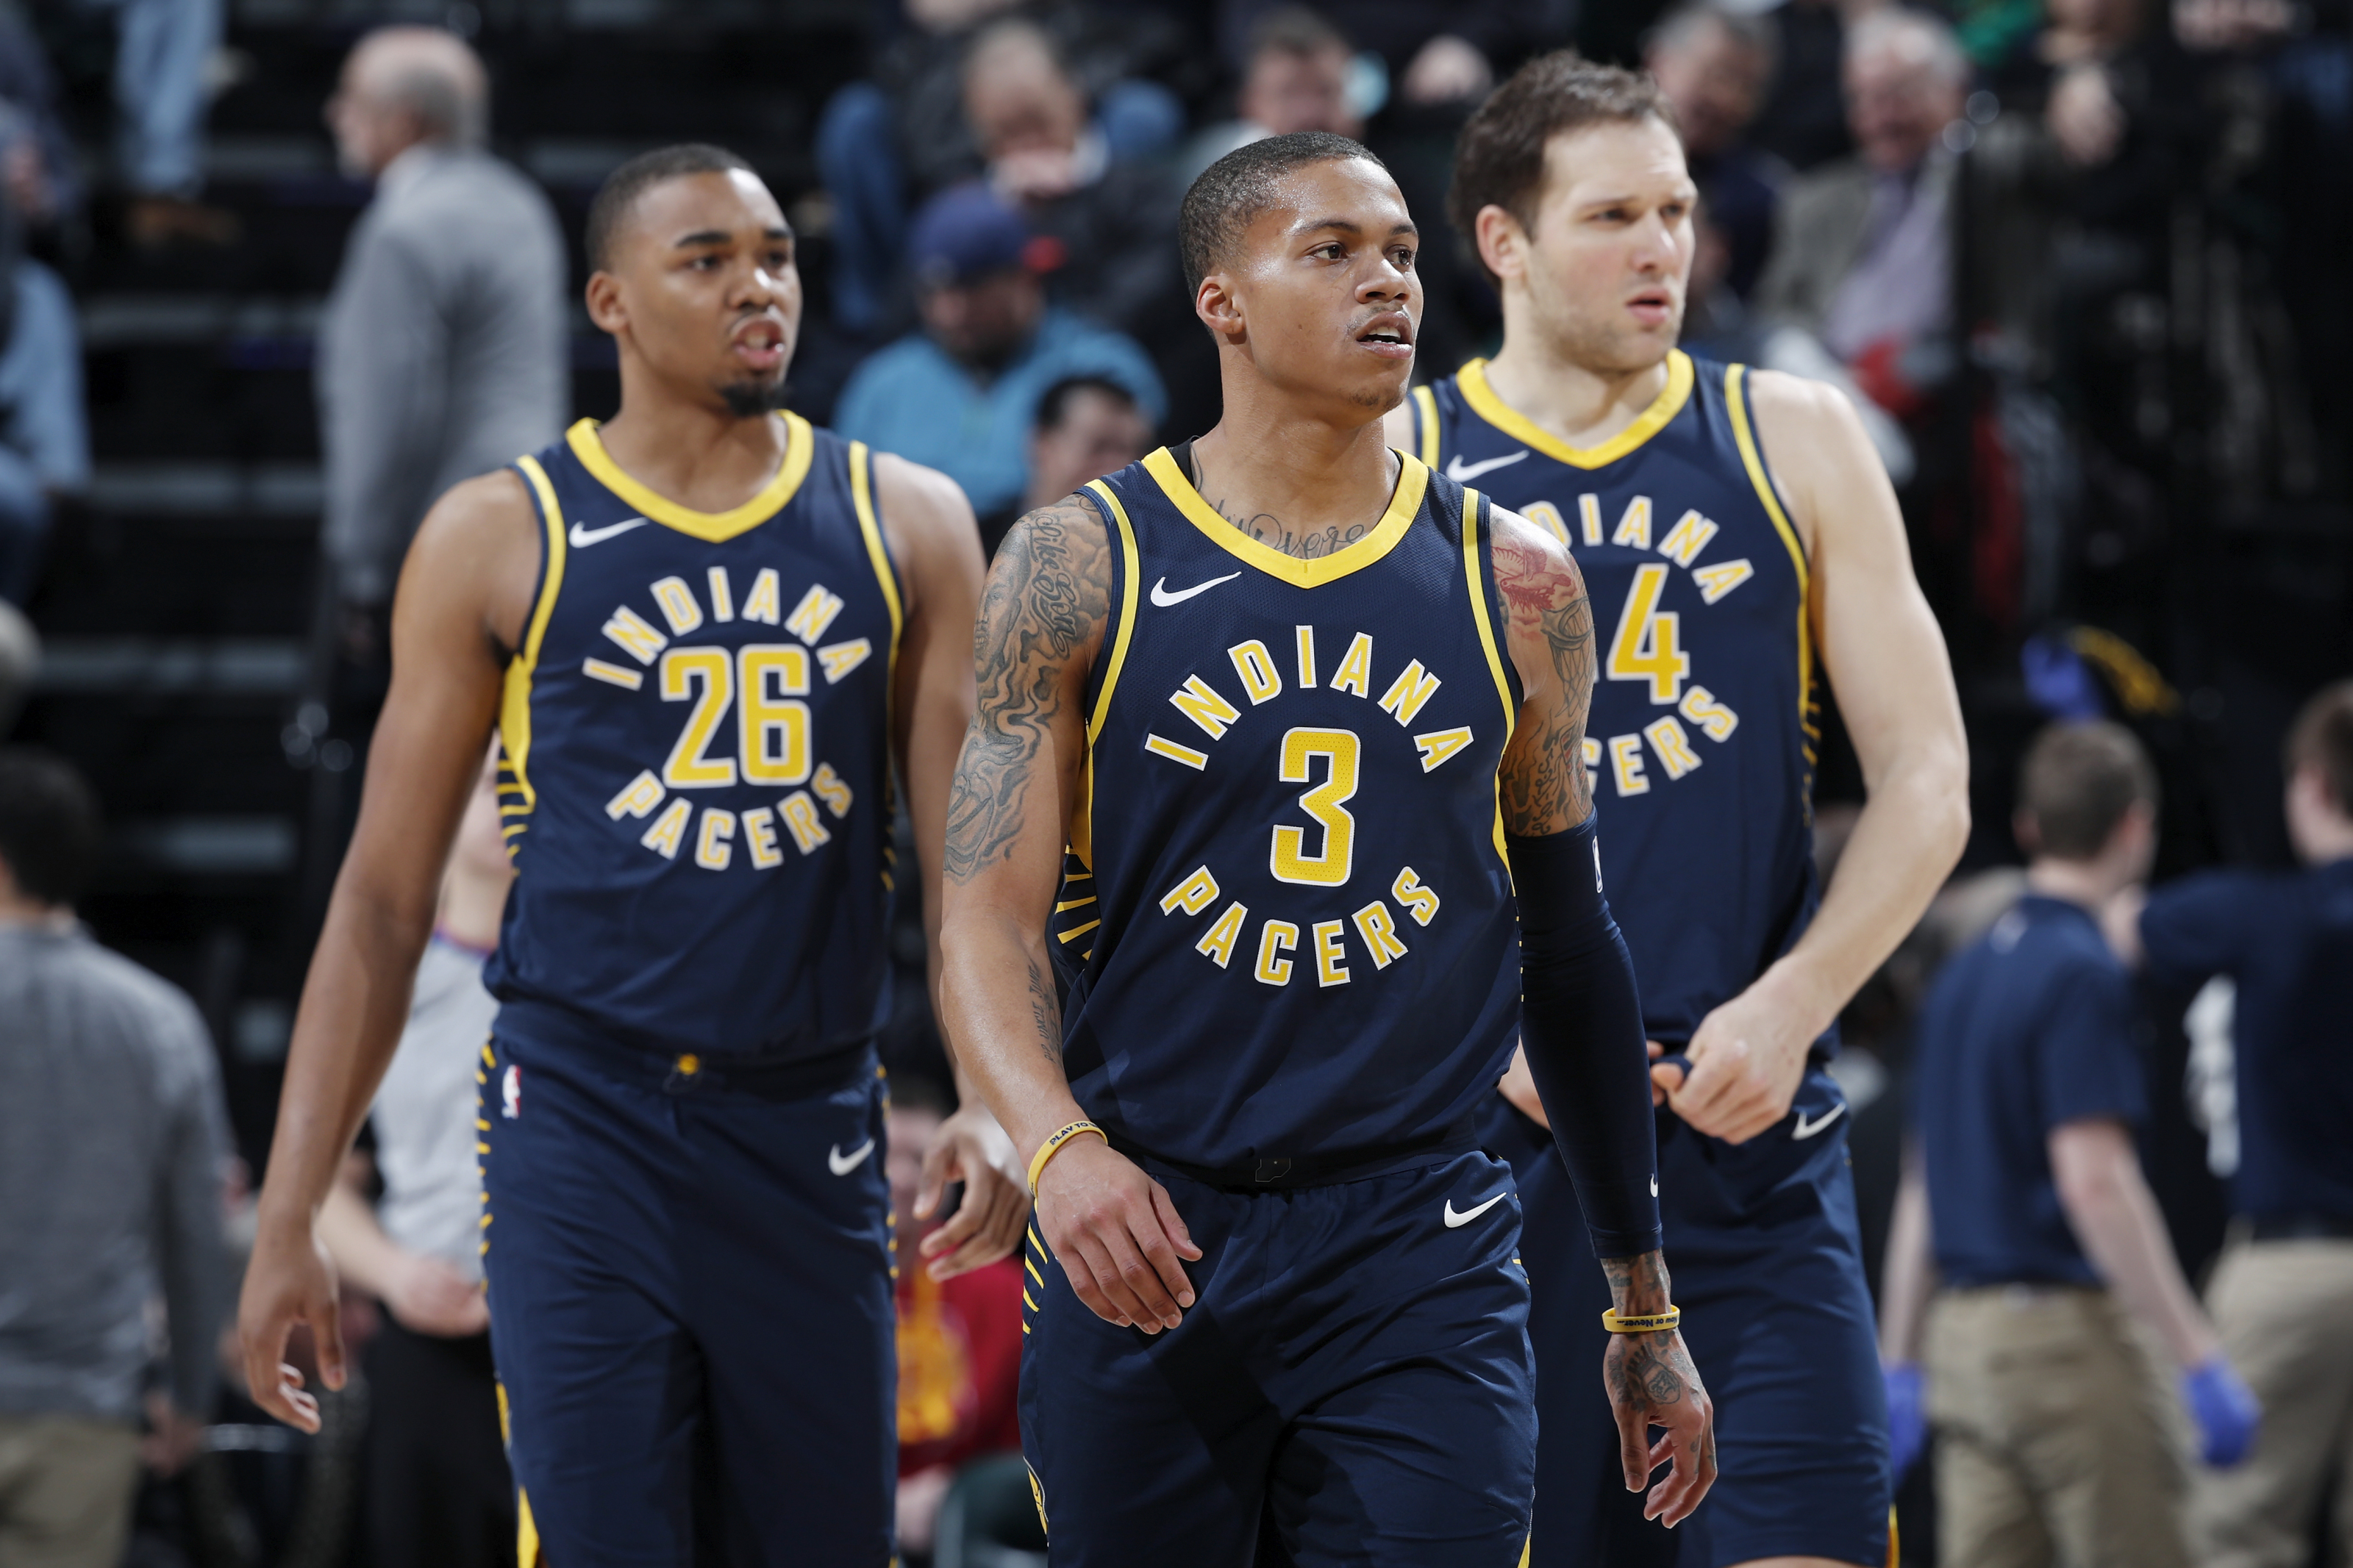 Sources: Indiana Pacers to pick up third year option in contract